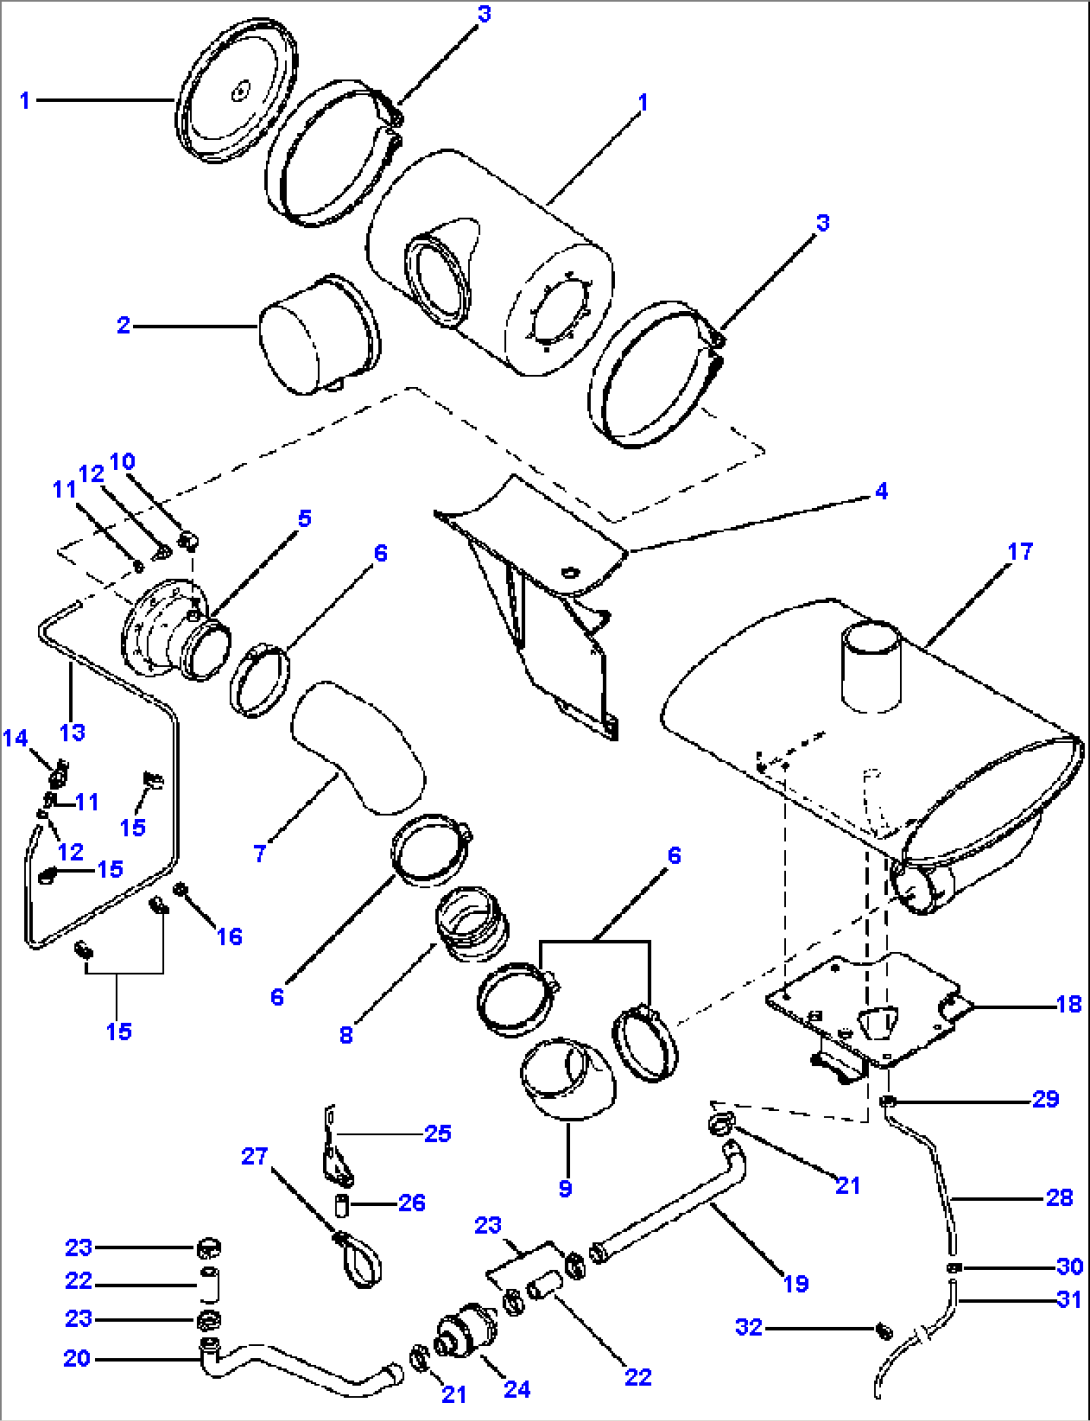 AIR CLEANER, MUFFLER, AND CONNECTIONS